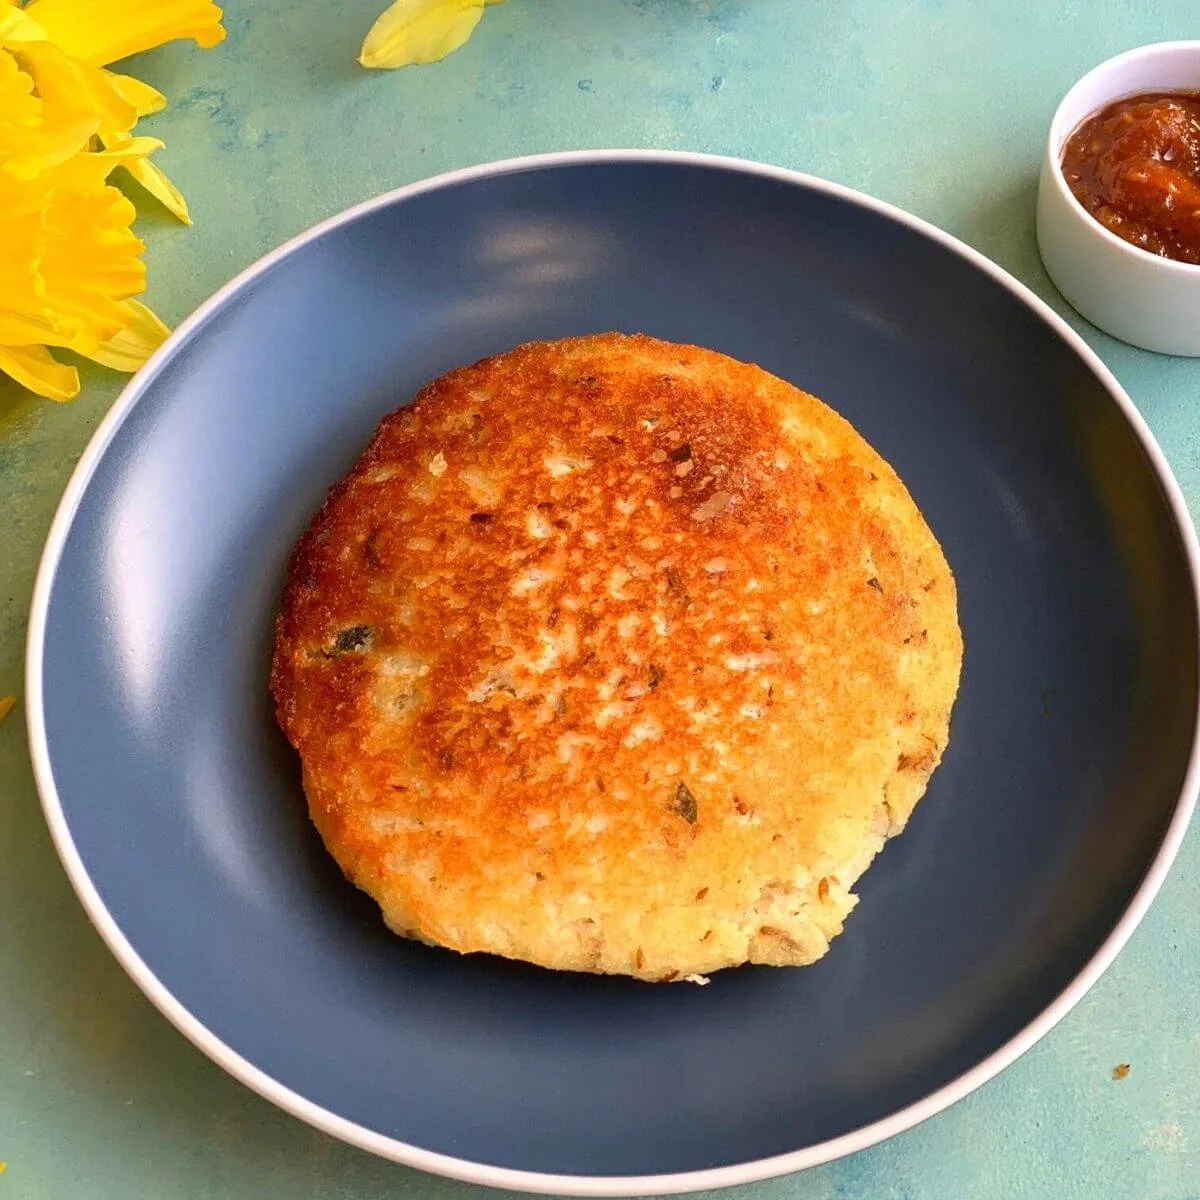 Dibba Rotti is a thick and crusty bread made using Rice Rava and Urad dal and generally served for breakfast or snack.